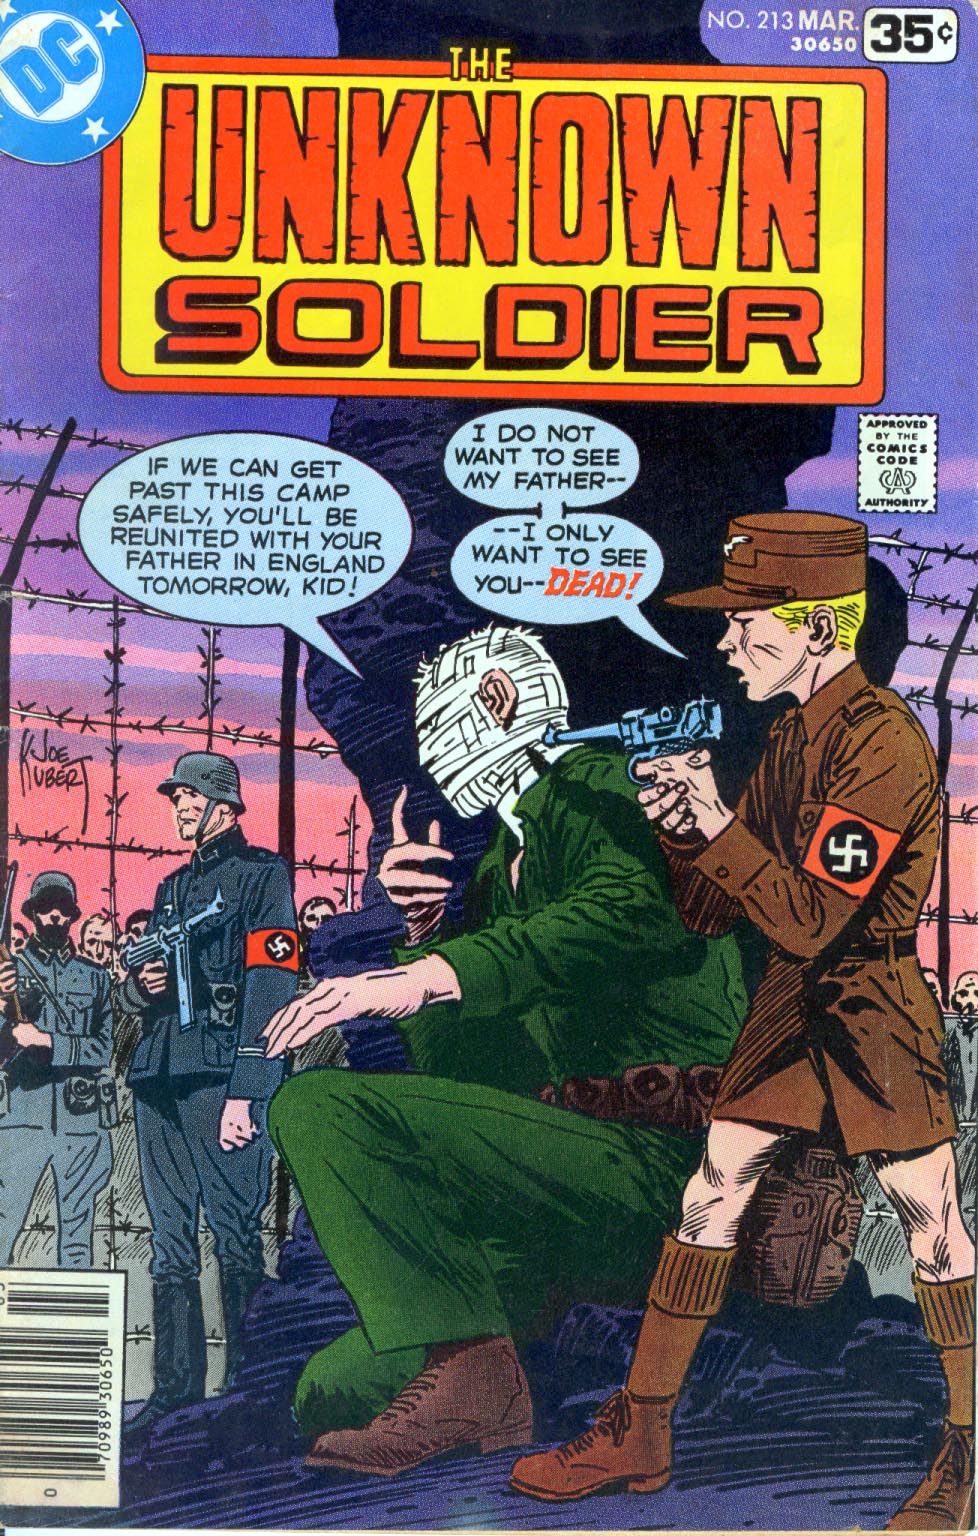 Unknown Soldier (1977) Issue #213 #9 - English 1